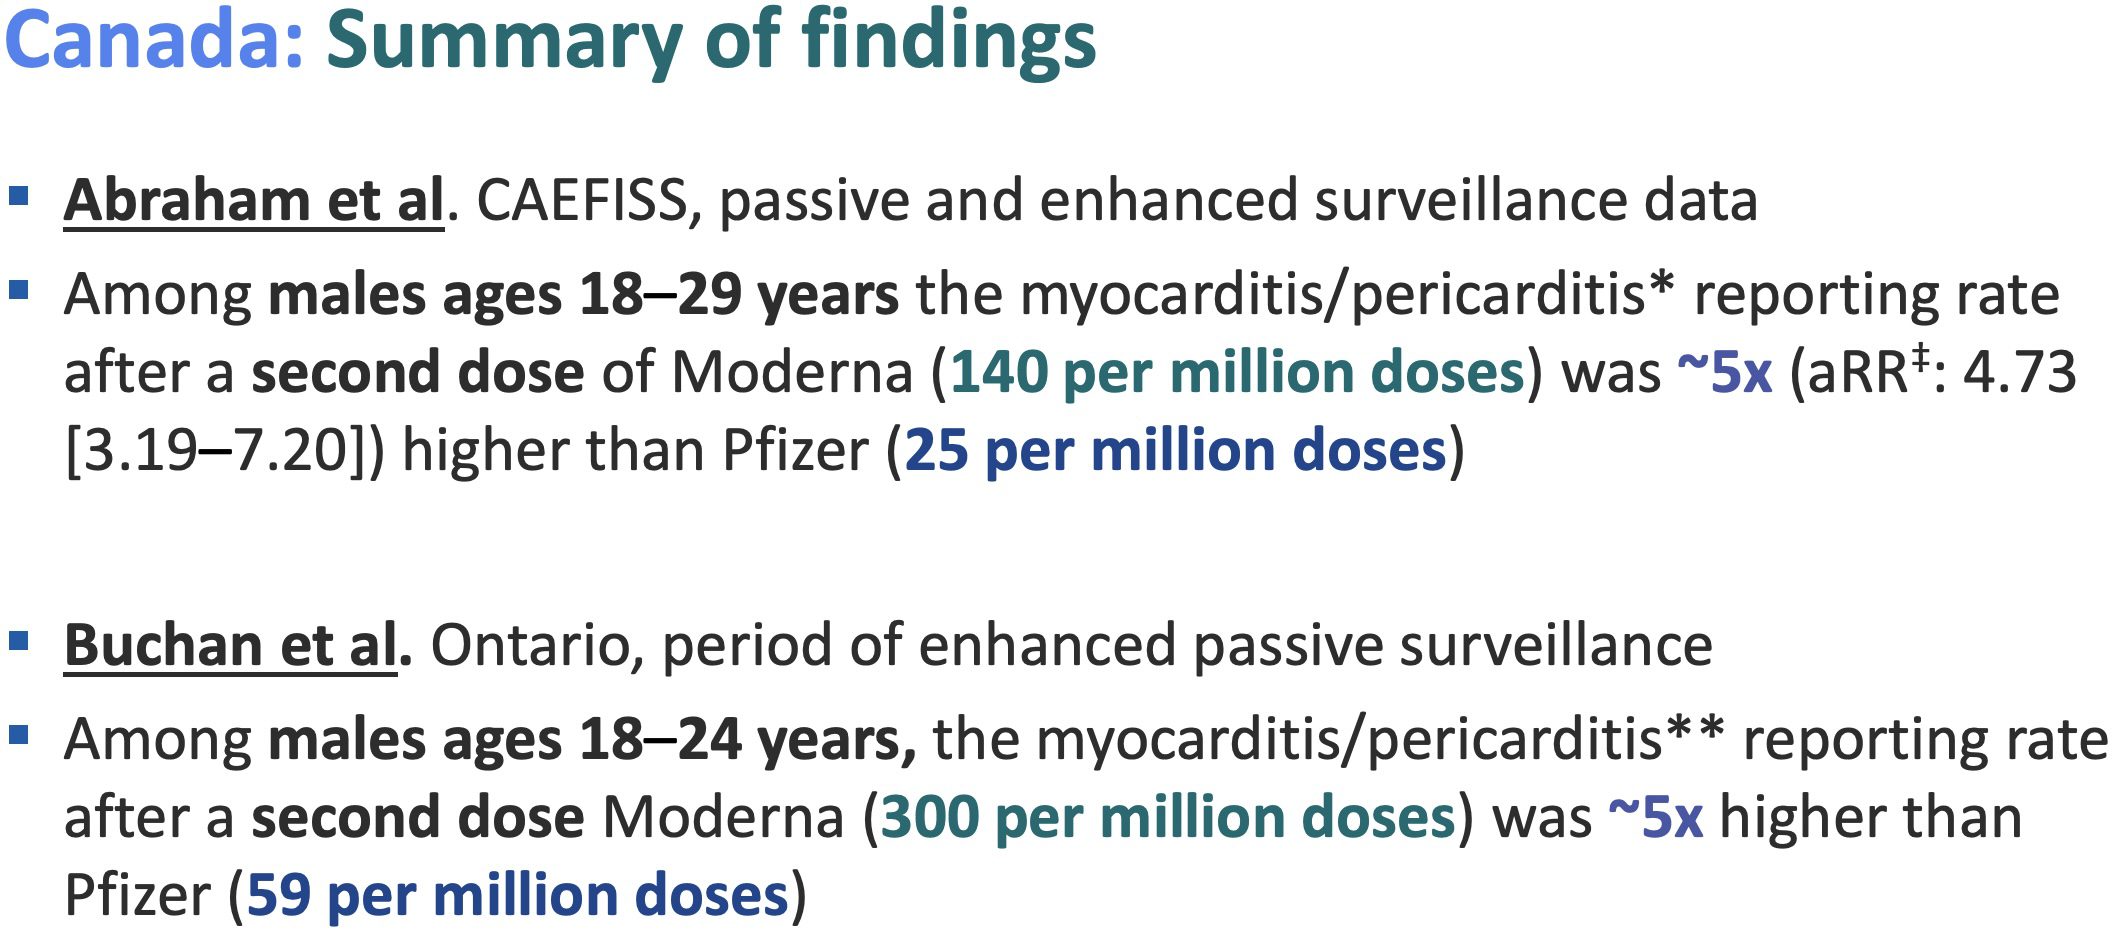  CDC Releases International Data on Risk of Myocarditis Caused by mRNA Covid-19 Vaccines Screen-Shot-2022-03-02-at-3.14.30-AM